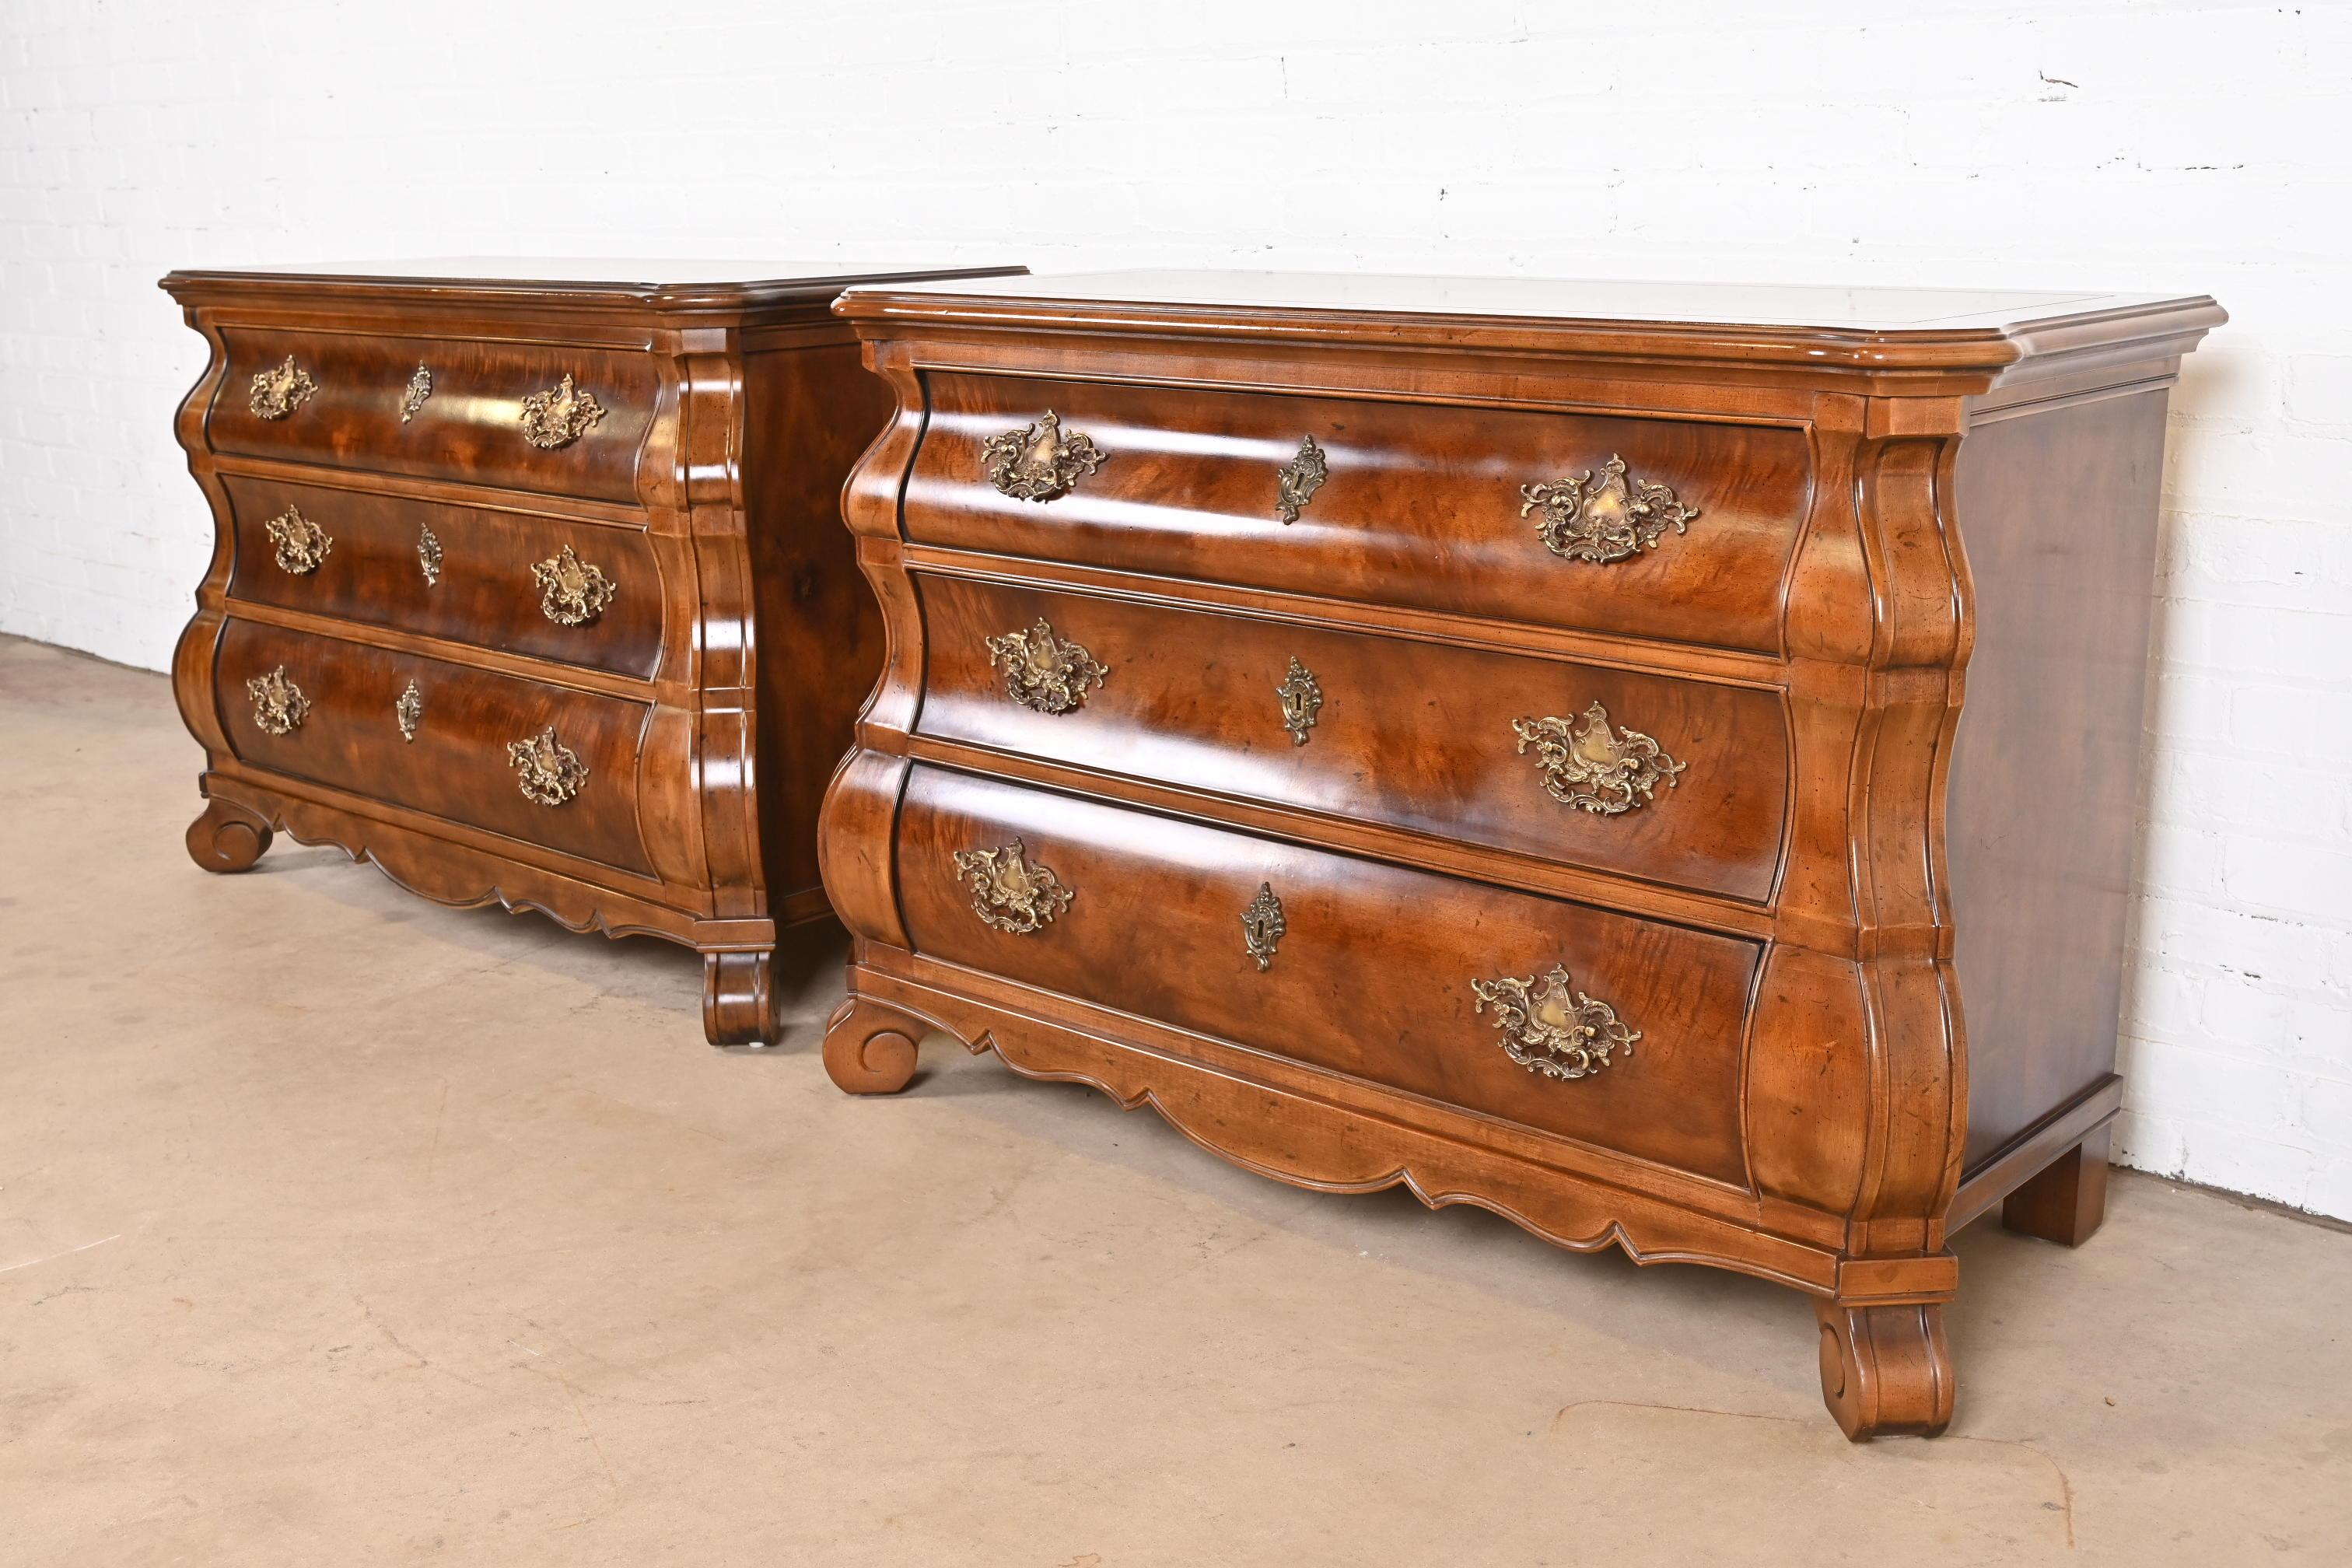 Henredon Italian Baroque Burled Mahogany Bombay Chests or Commodes, Pair In Good Condition For Sale In South Bend, IN